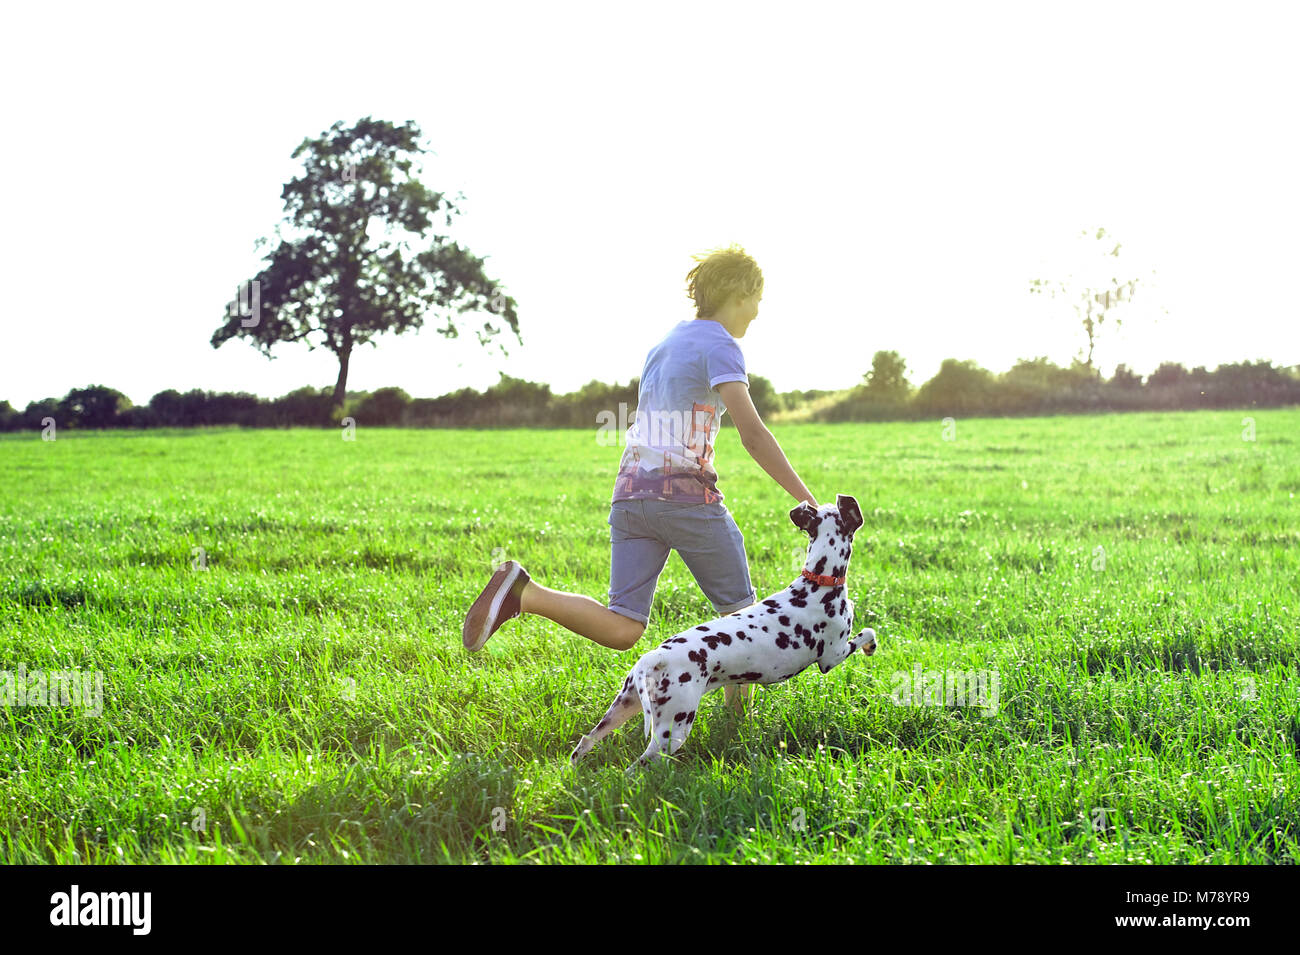 A boy runs across a sun kissed field with a Dalmatian dog trying to keep up. Stock Photo